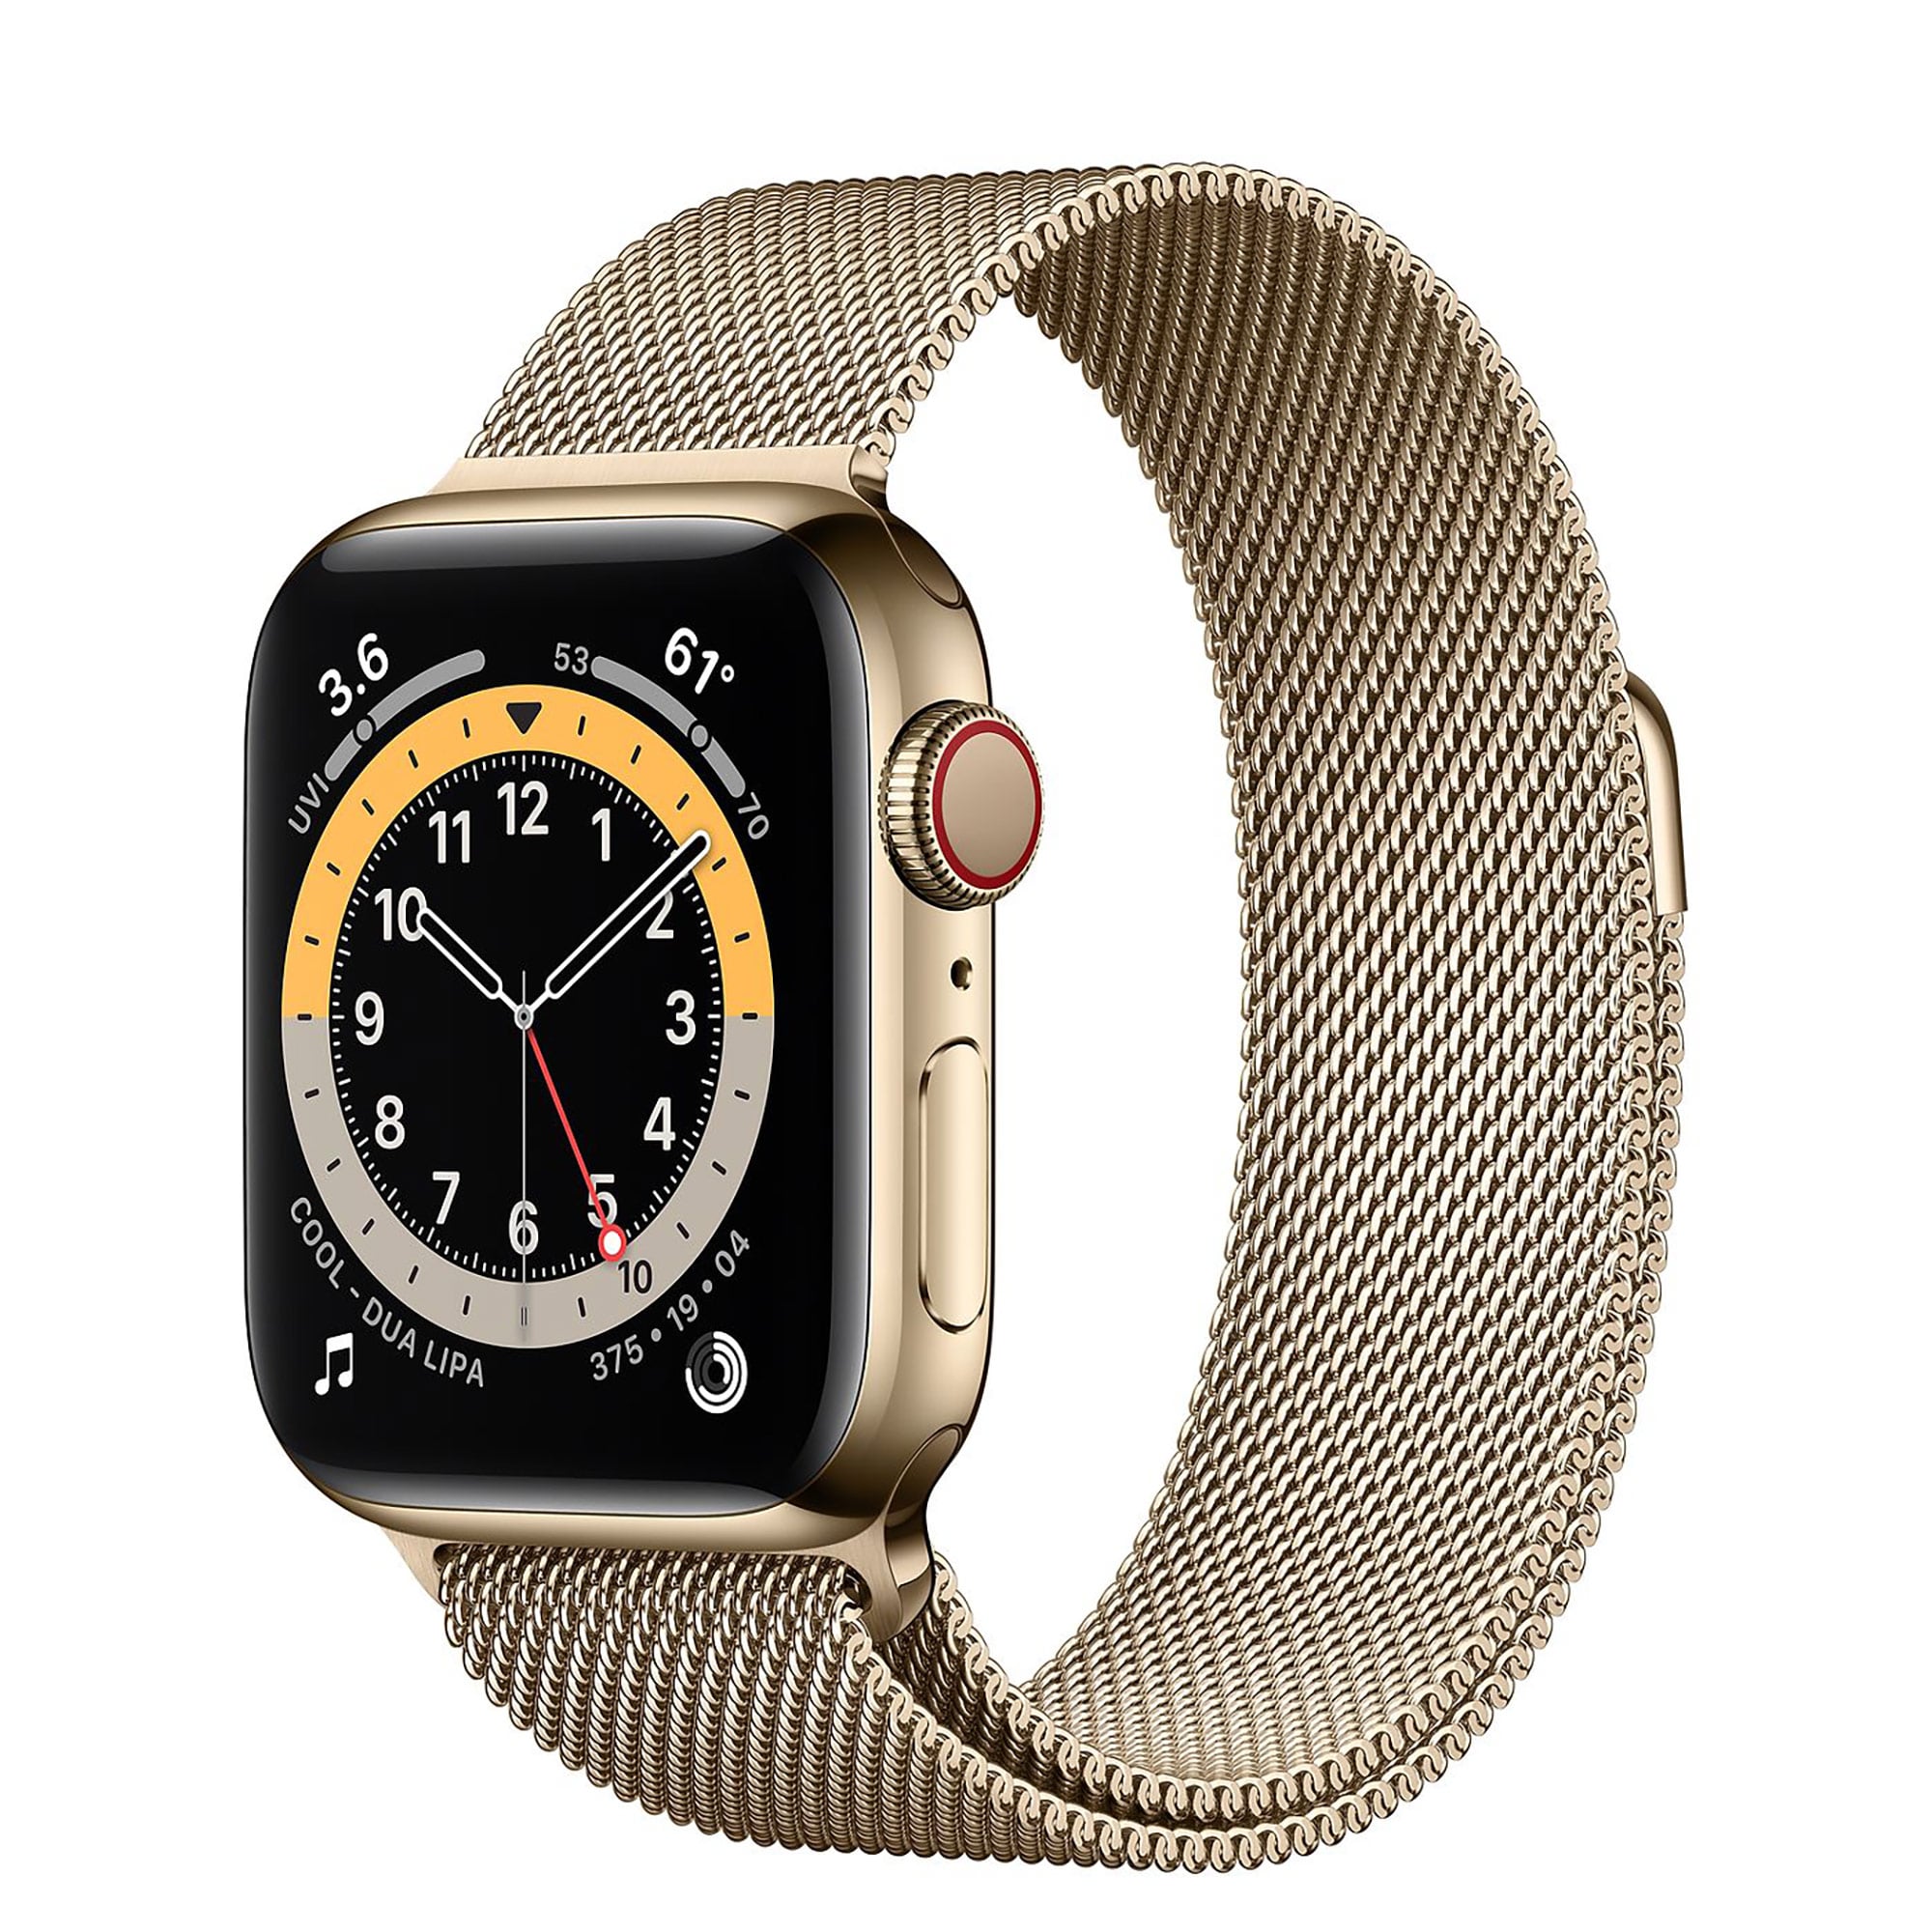 Apple Watch Series 6 Gold Stainless Steel Case with Gold Milanese Loop